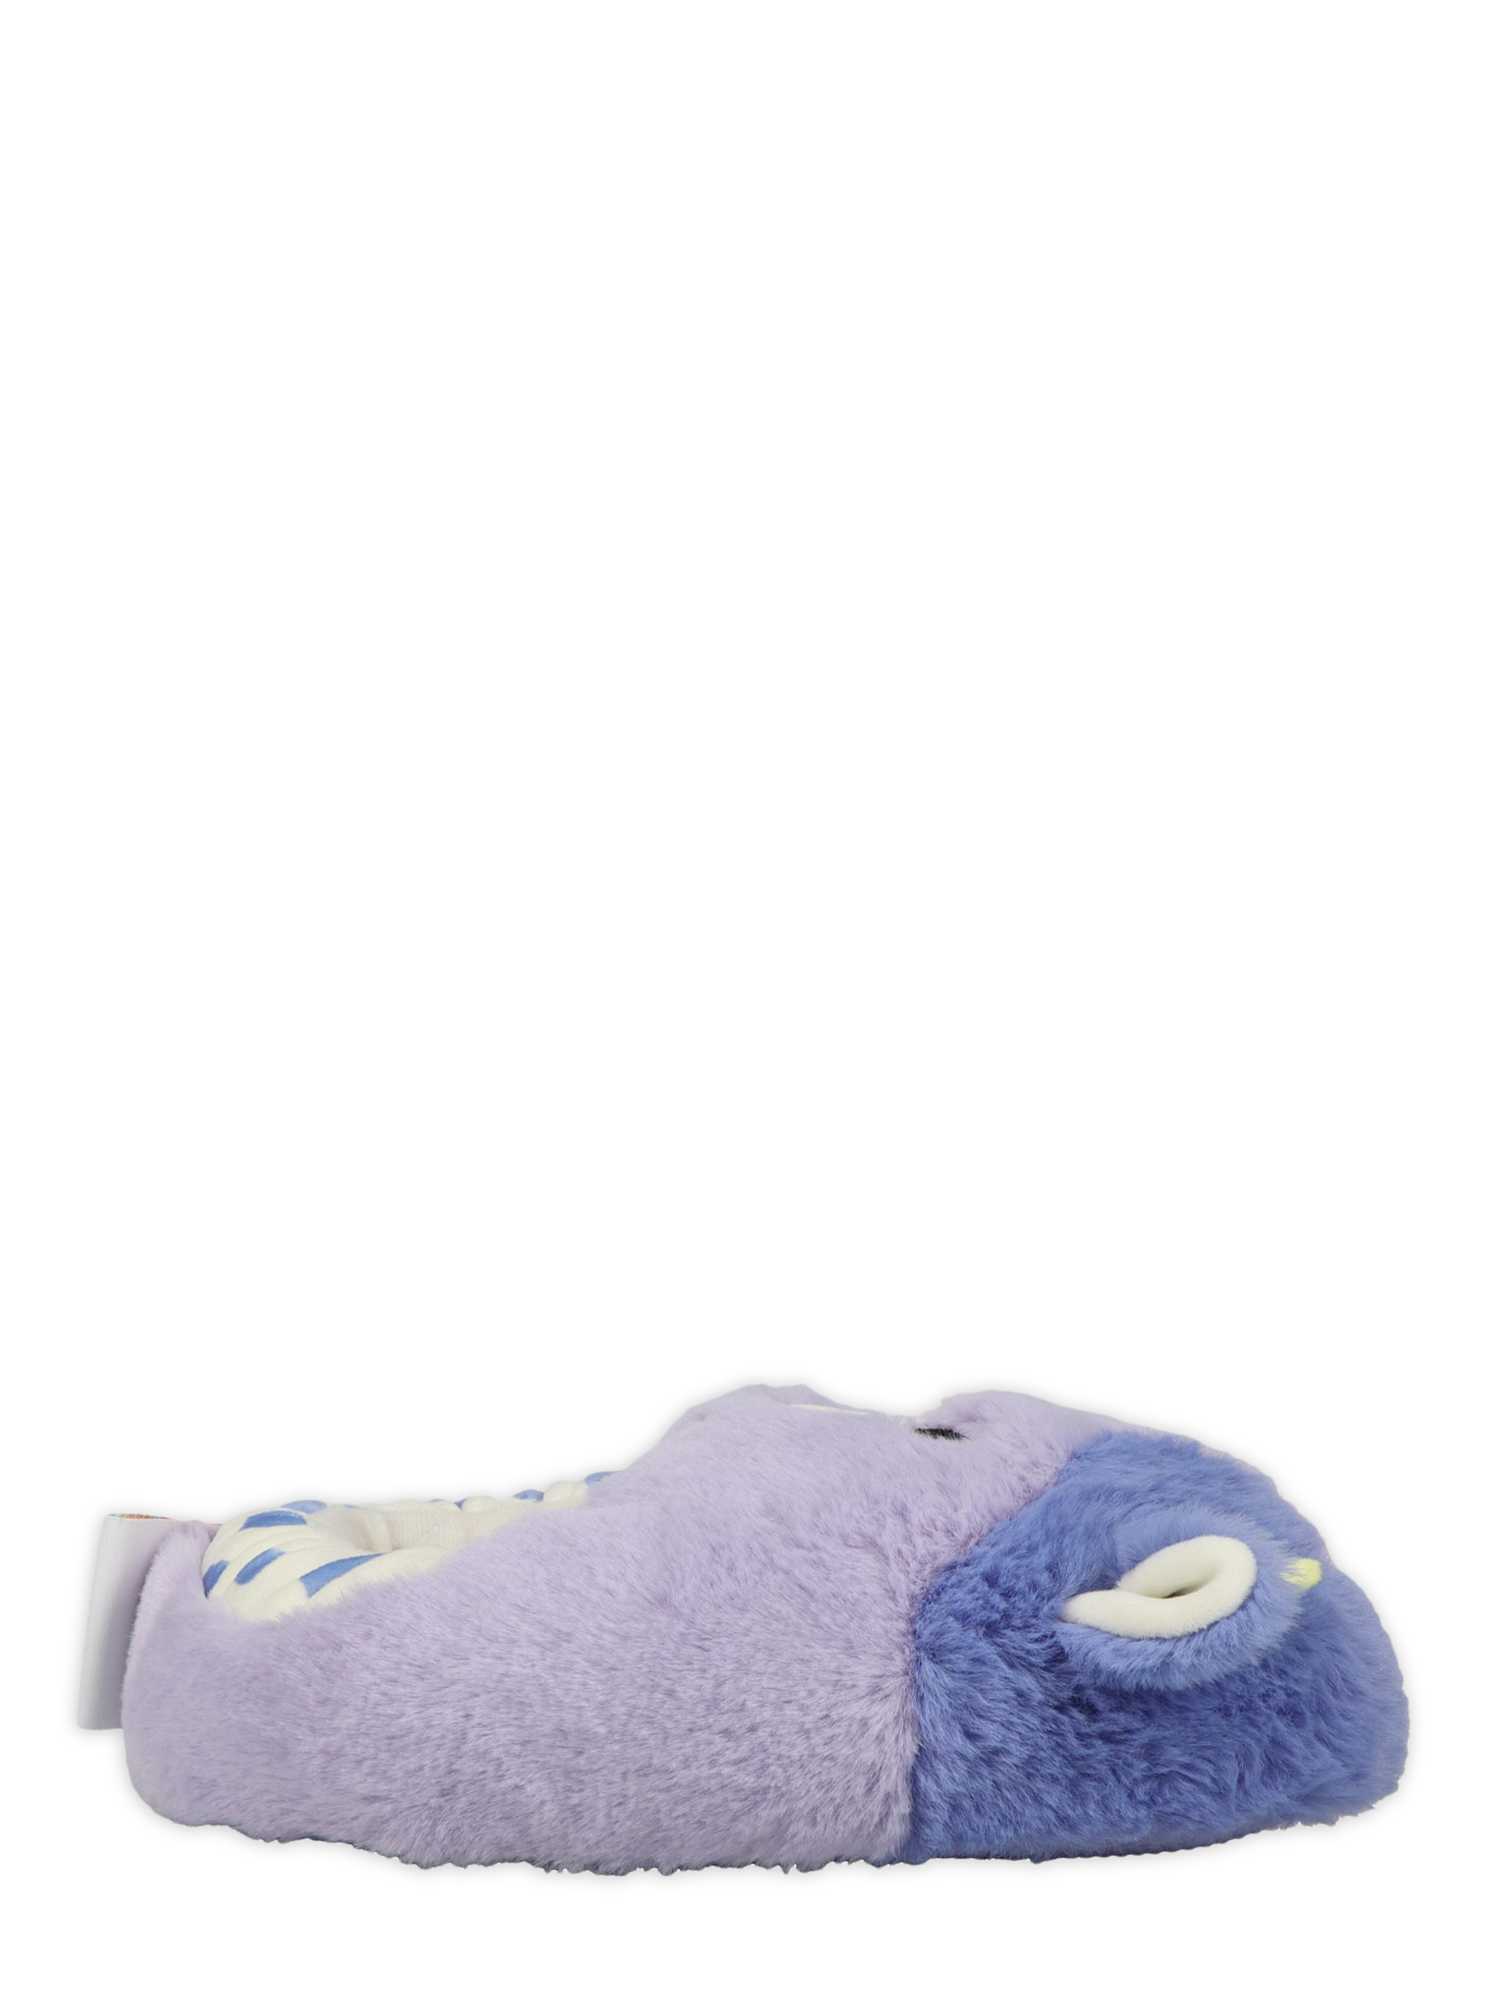 Squishmallows Toddler & Kids Bubba the Cow Slippers - image 5 of 6